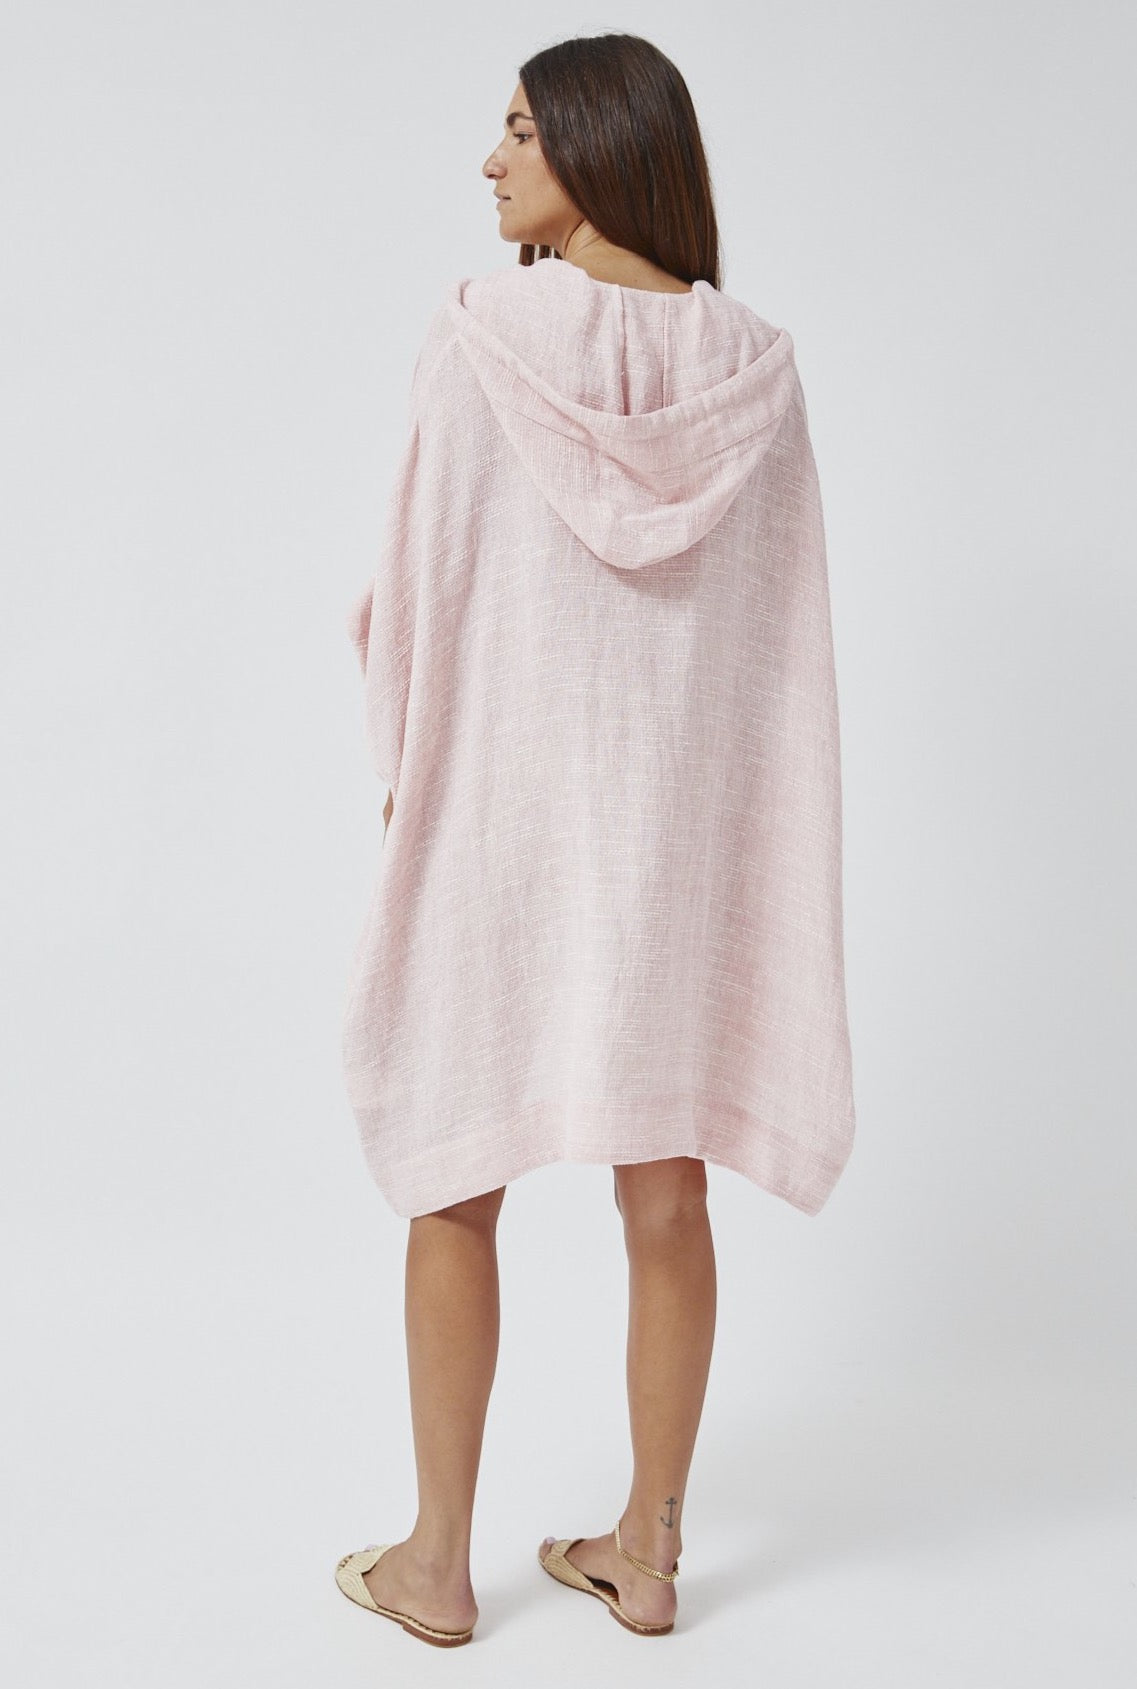 HOODED PALE PINK STRIPED GAUZE PONCHO